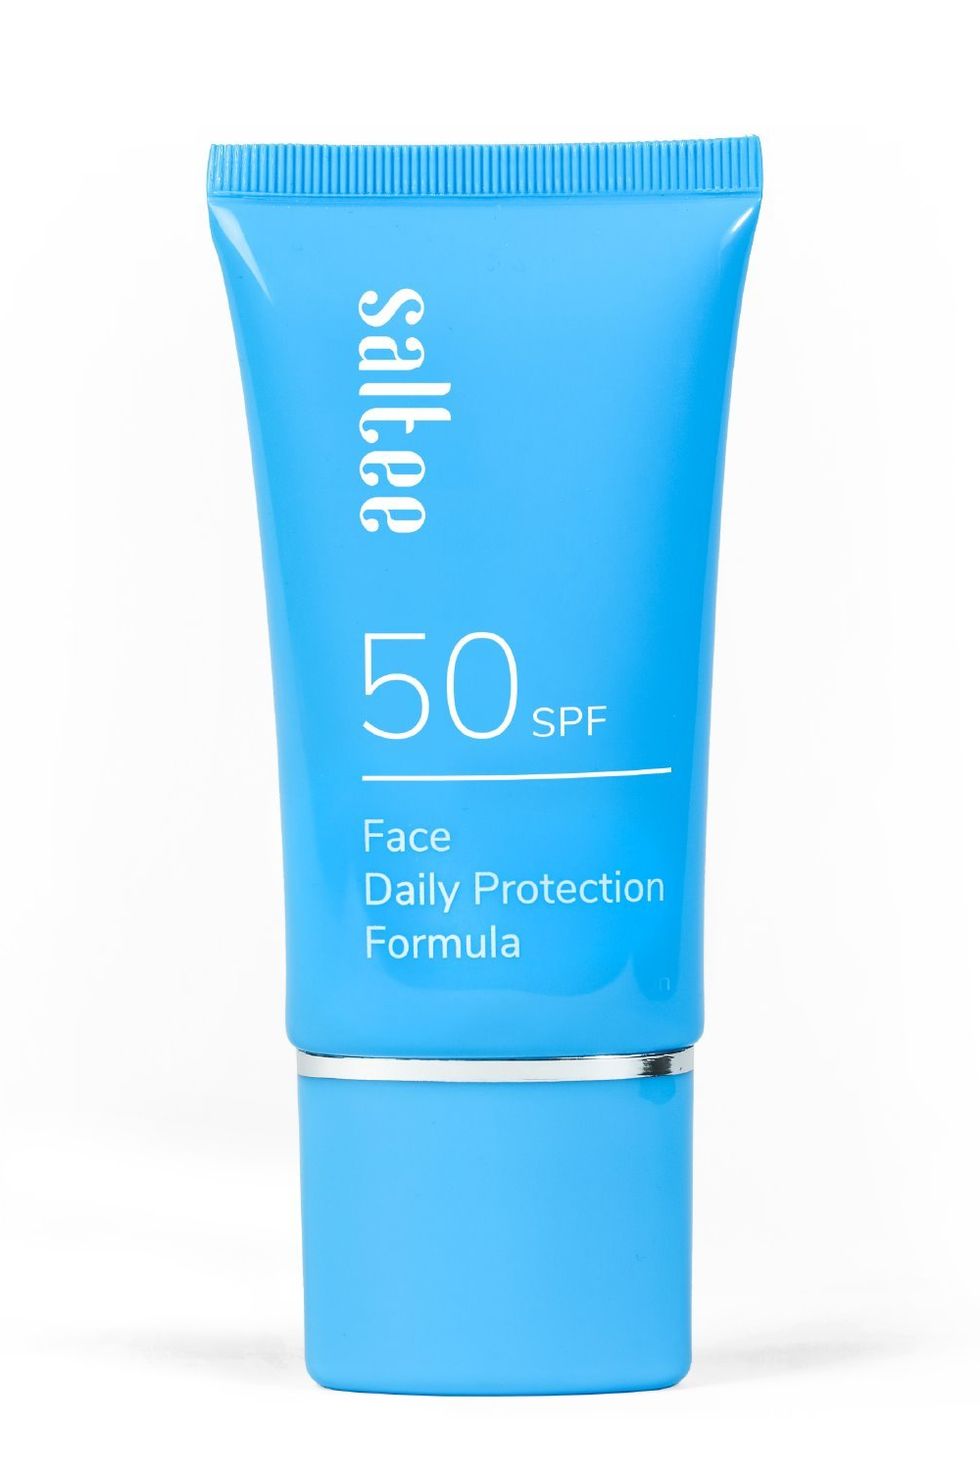 Face: Daily Protection Formula SPF50 